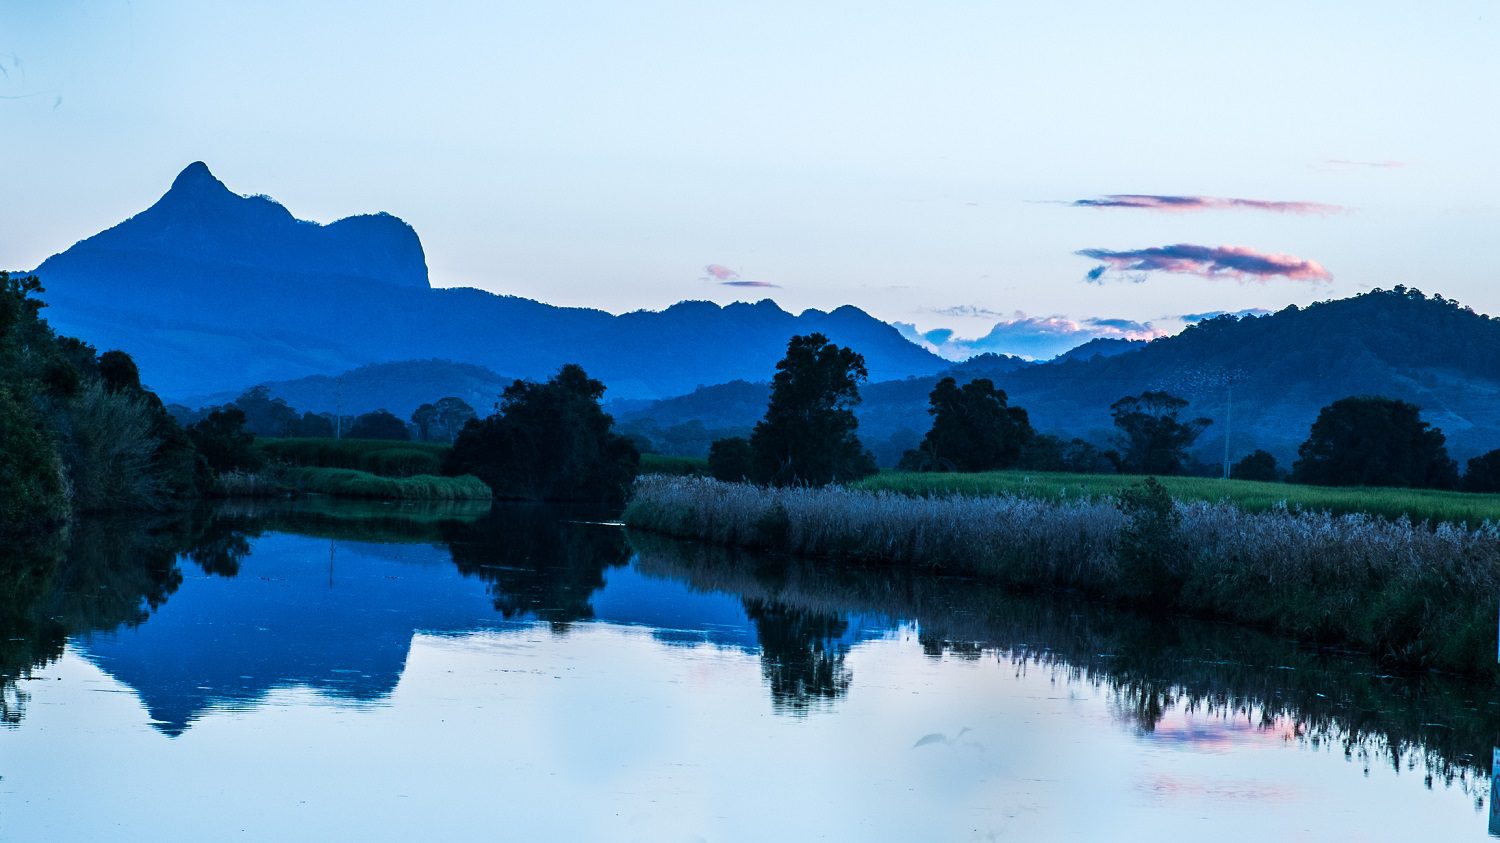 Mount Warning at sunset with reflection: Photo 44145884 © Cathyr1 | Dreamstime.com